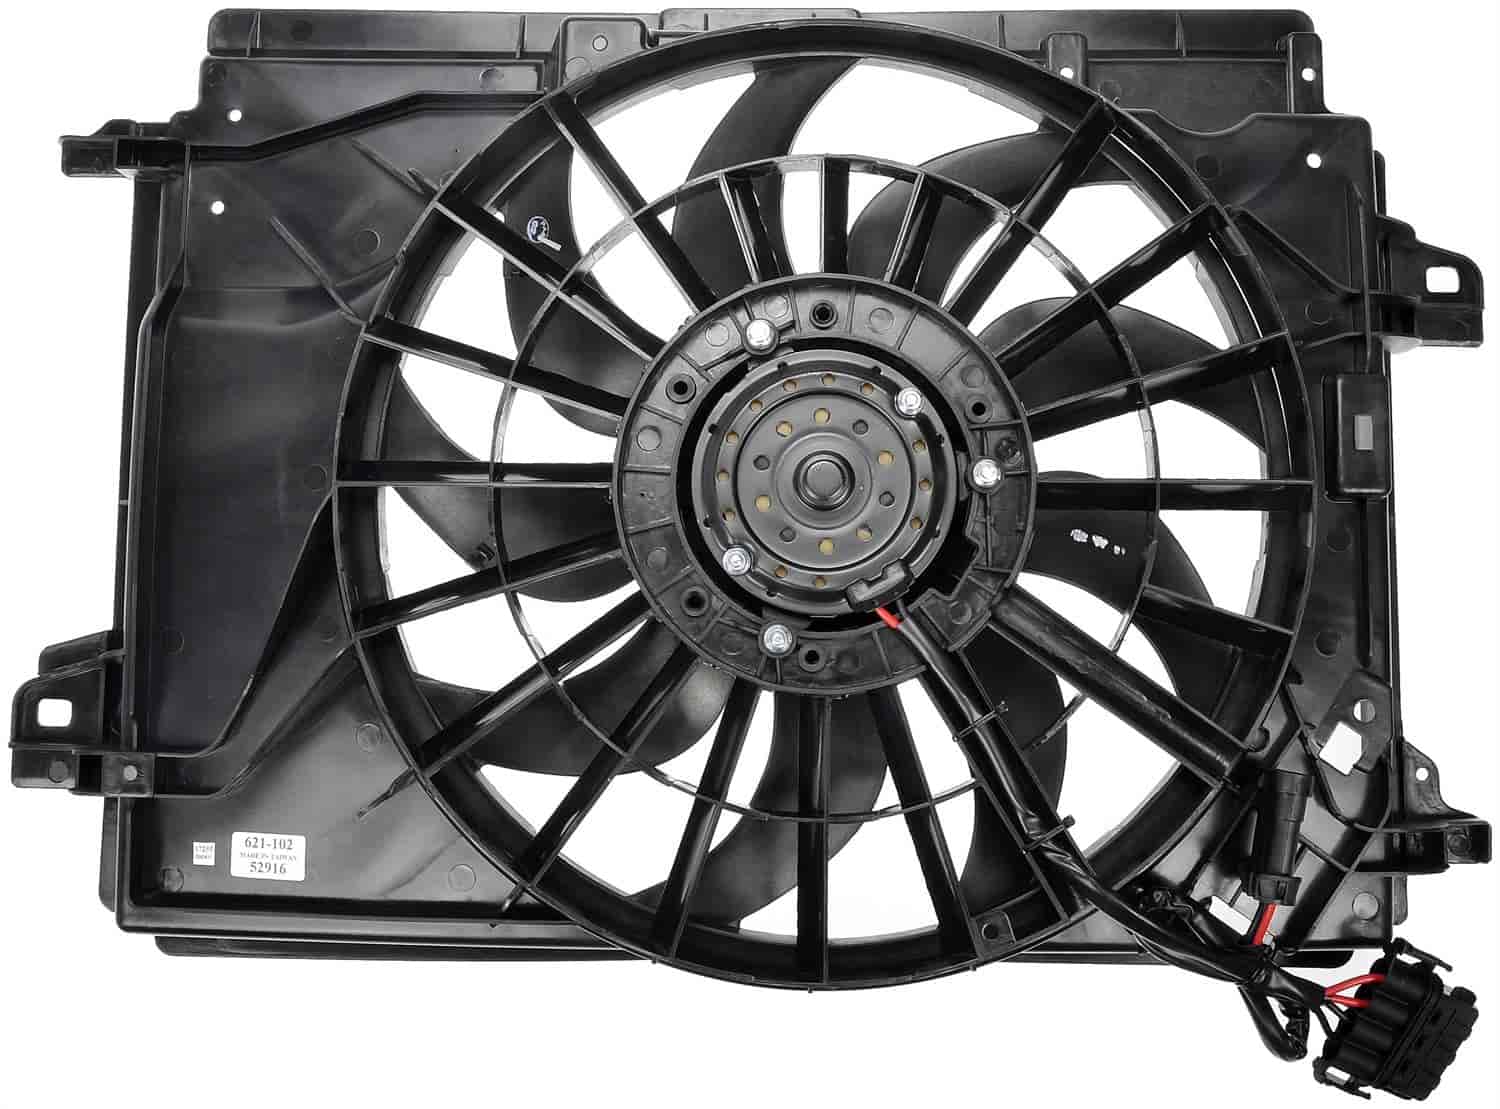 Radiator Fan Assembly without Controller for 2005-2009 Cadillac XLR, 2005-2013 Chevy Corvette